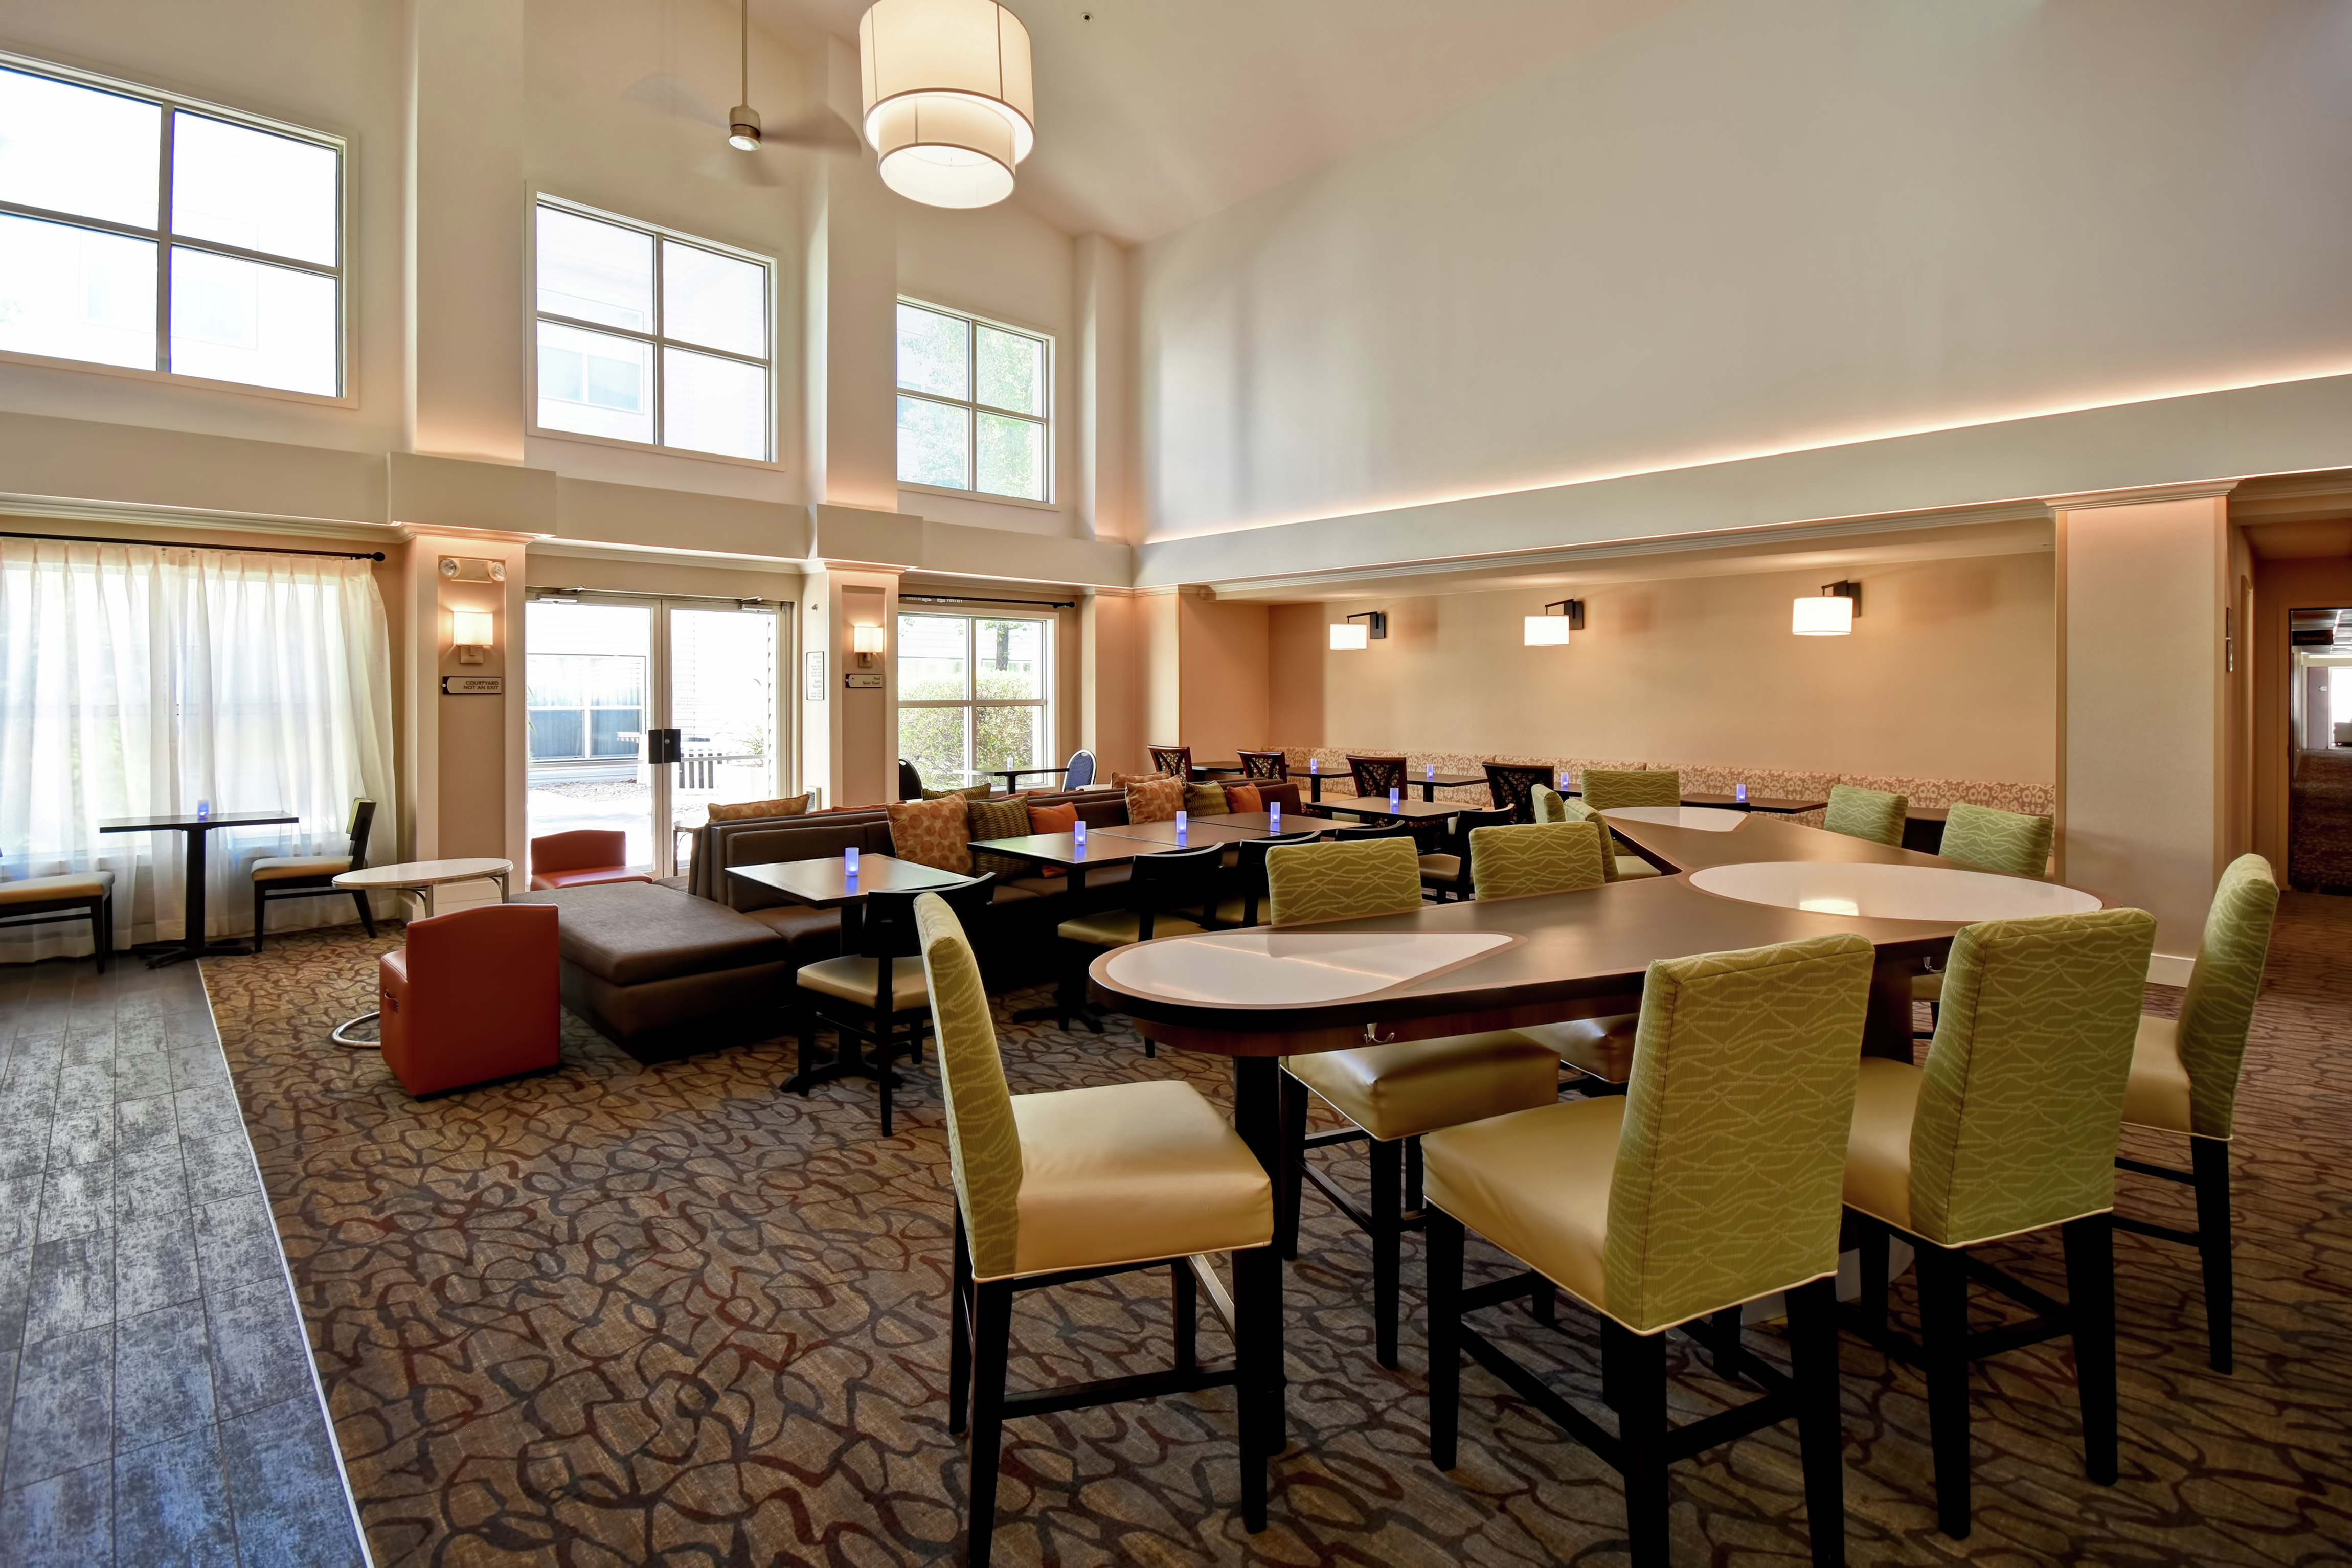 Lobby seating for breakfast and evening social